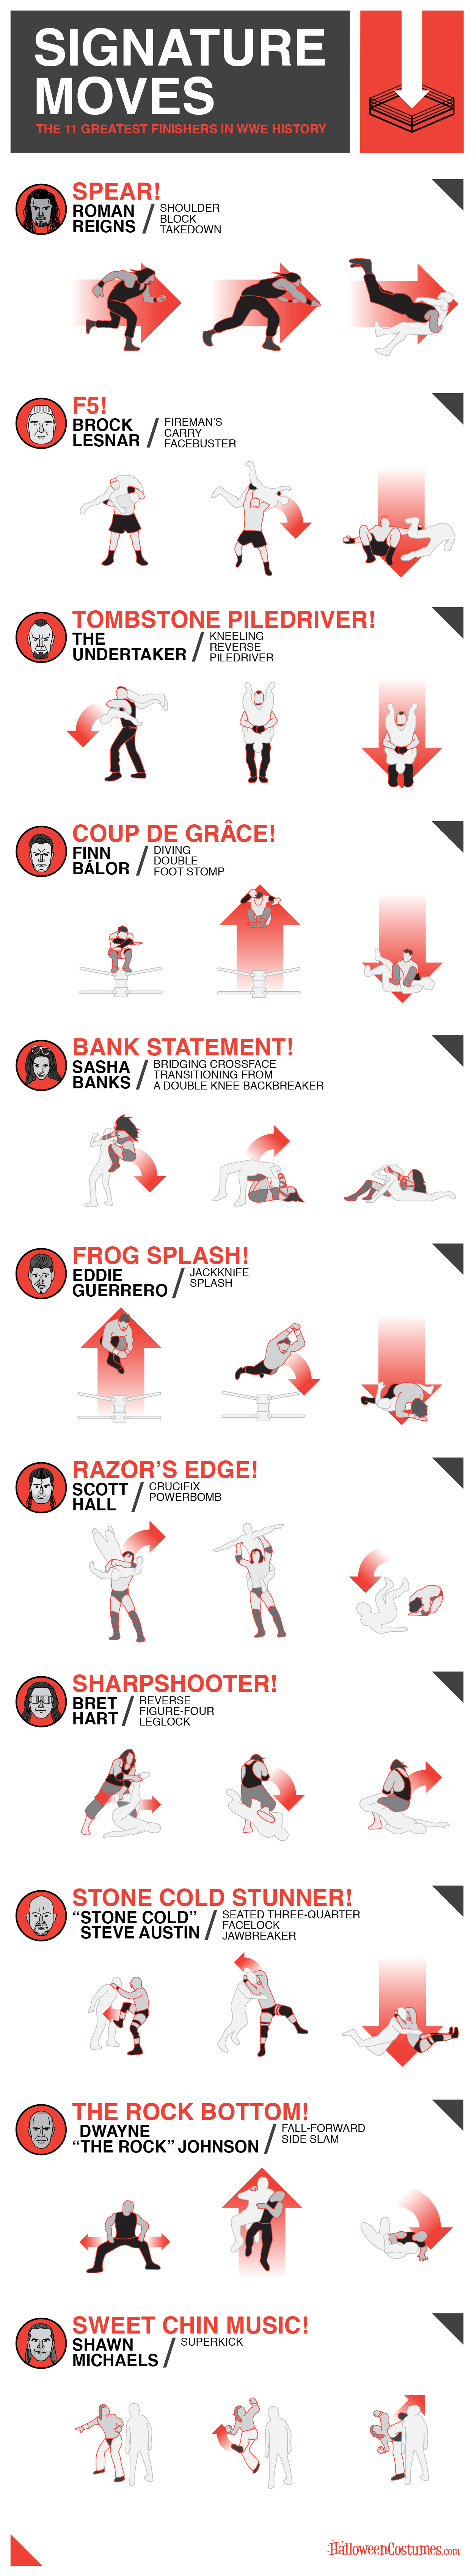 WWE-Finishers-Infographic